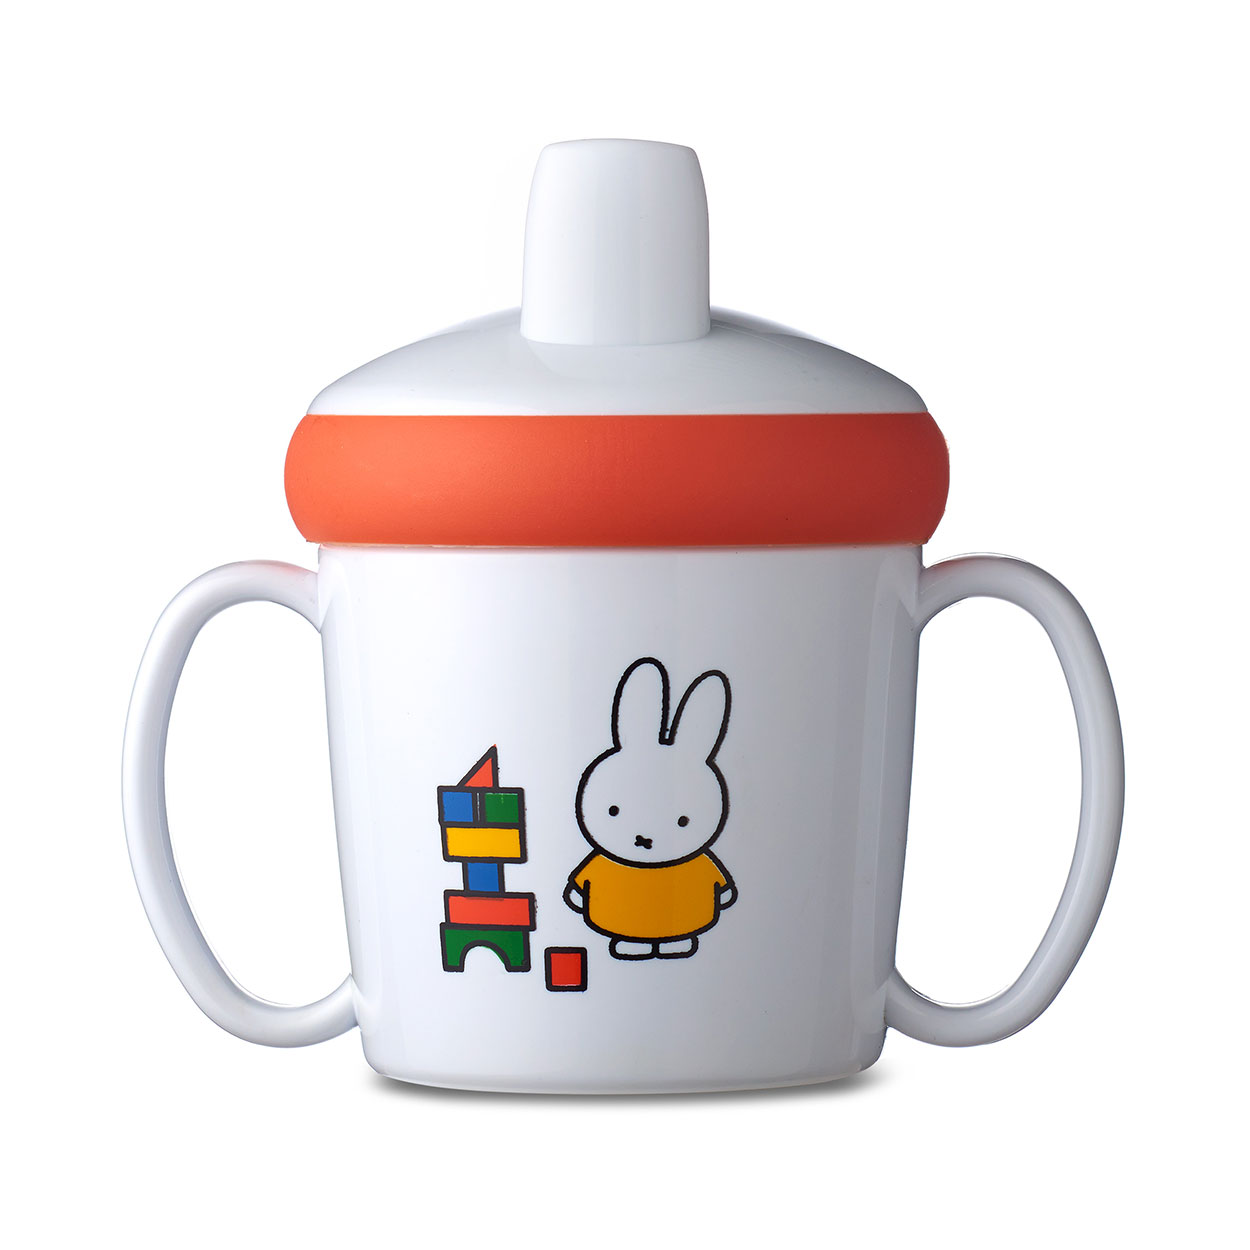 Afm dubbellaag Roei uit Mepal non-spill Cup-Miffy Plays, 200 ml | Thimble Toys